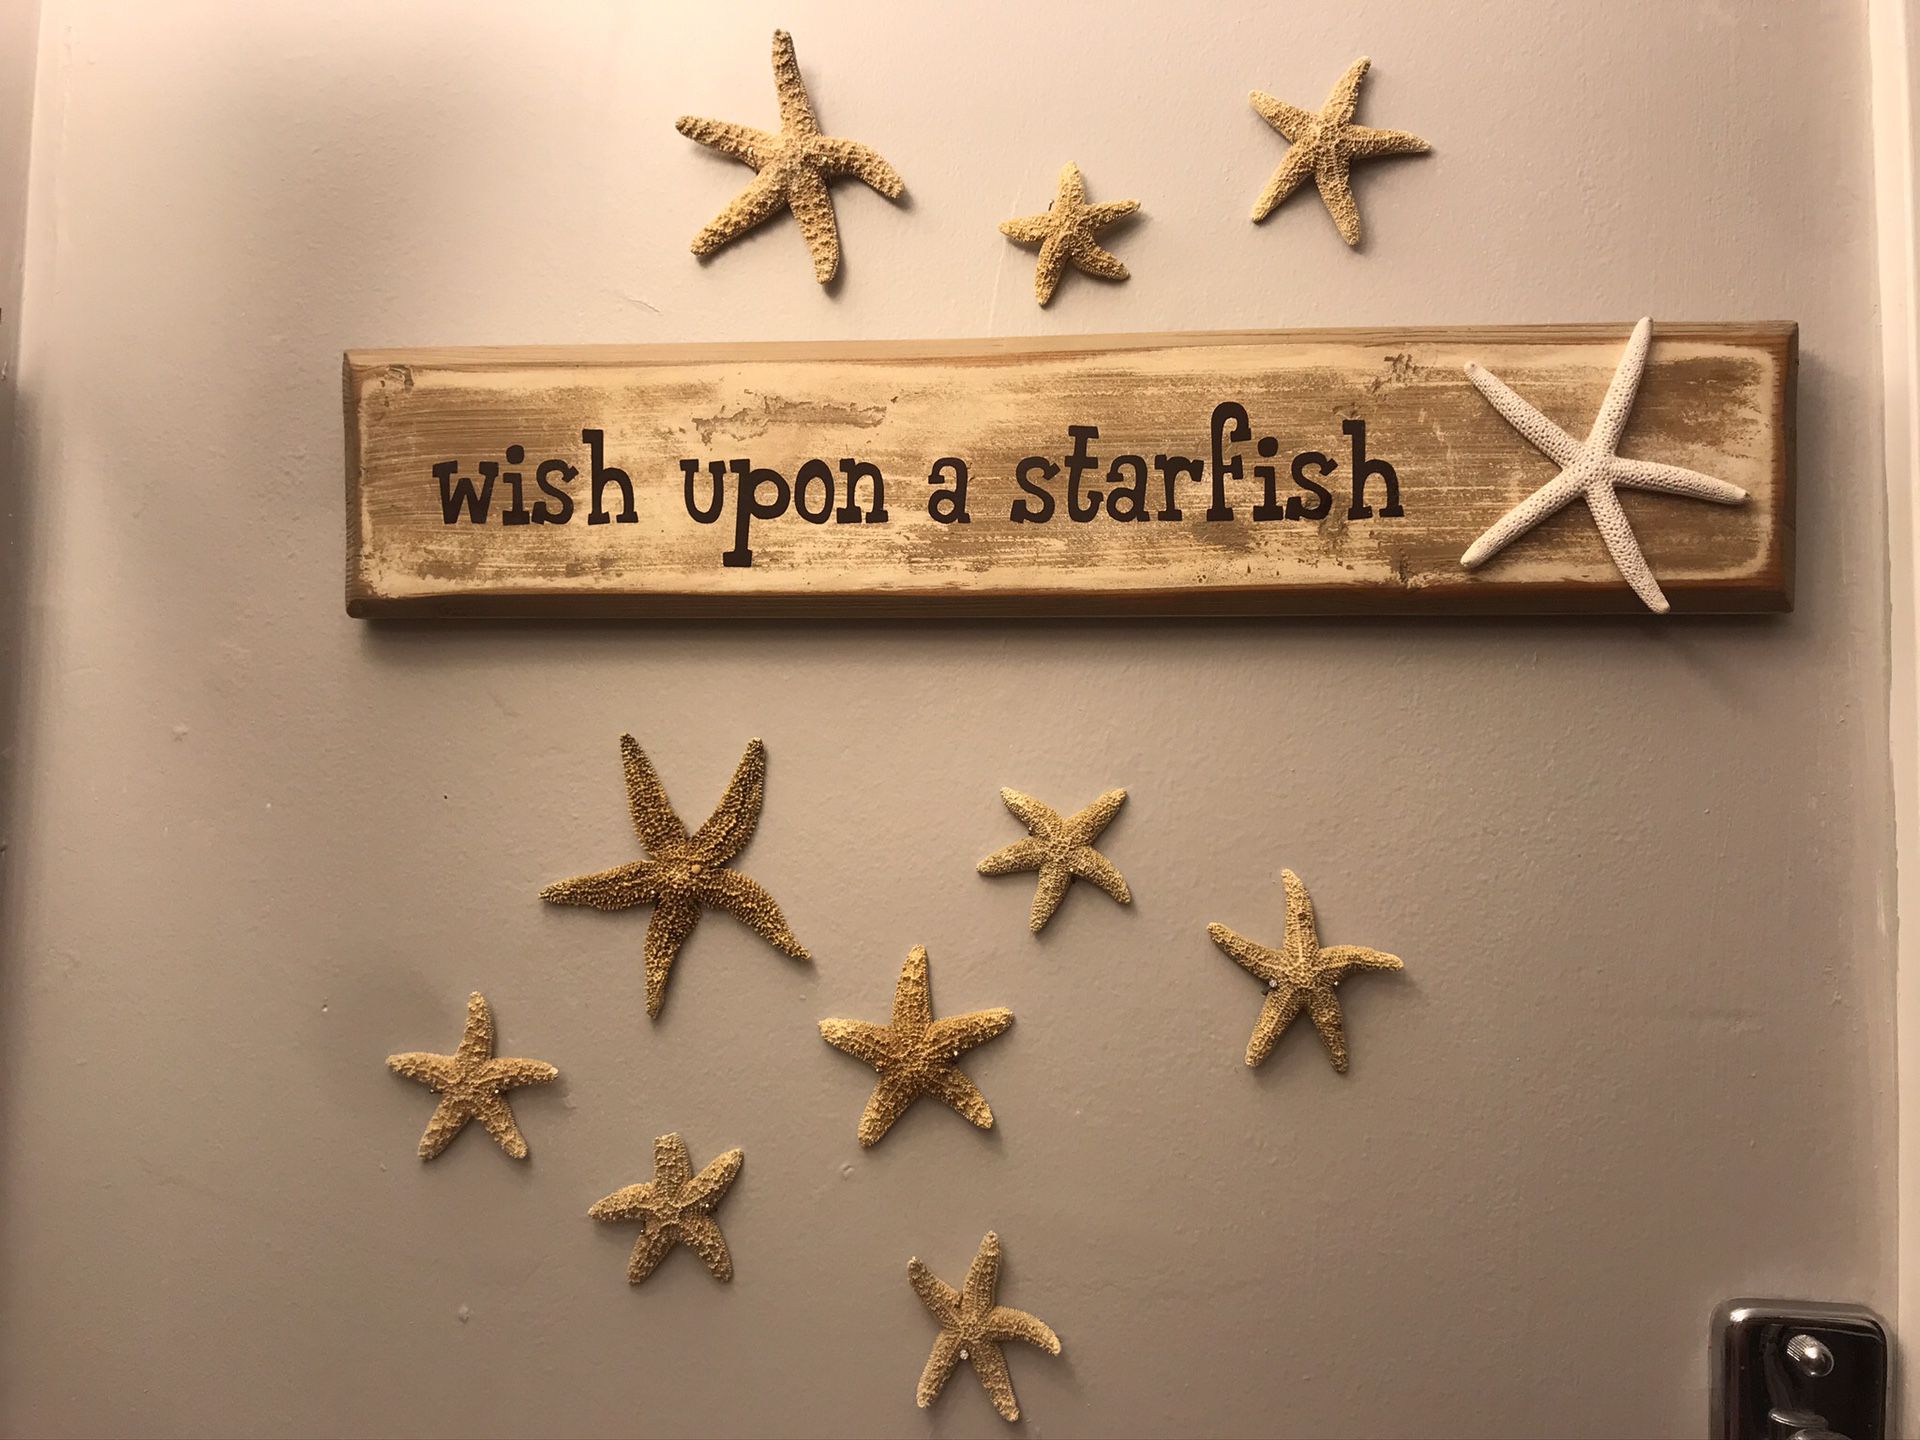 FUN hand made sign - INCLUDES starfish!!